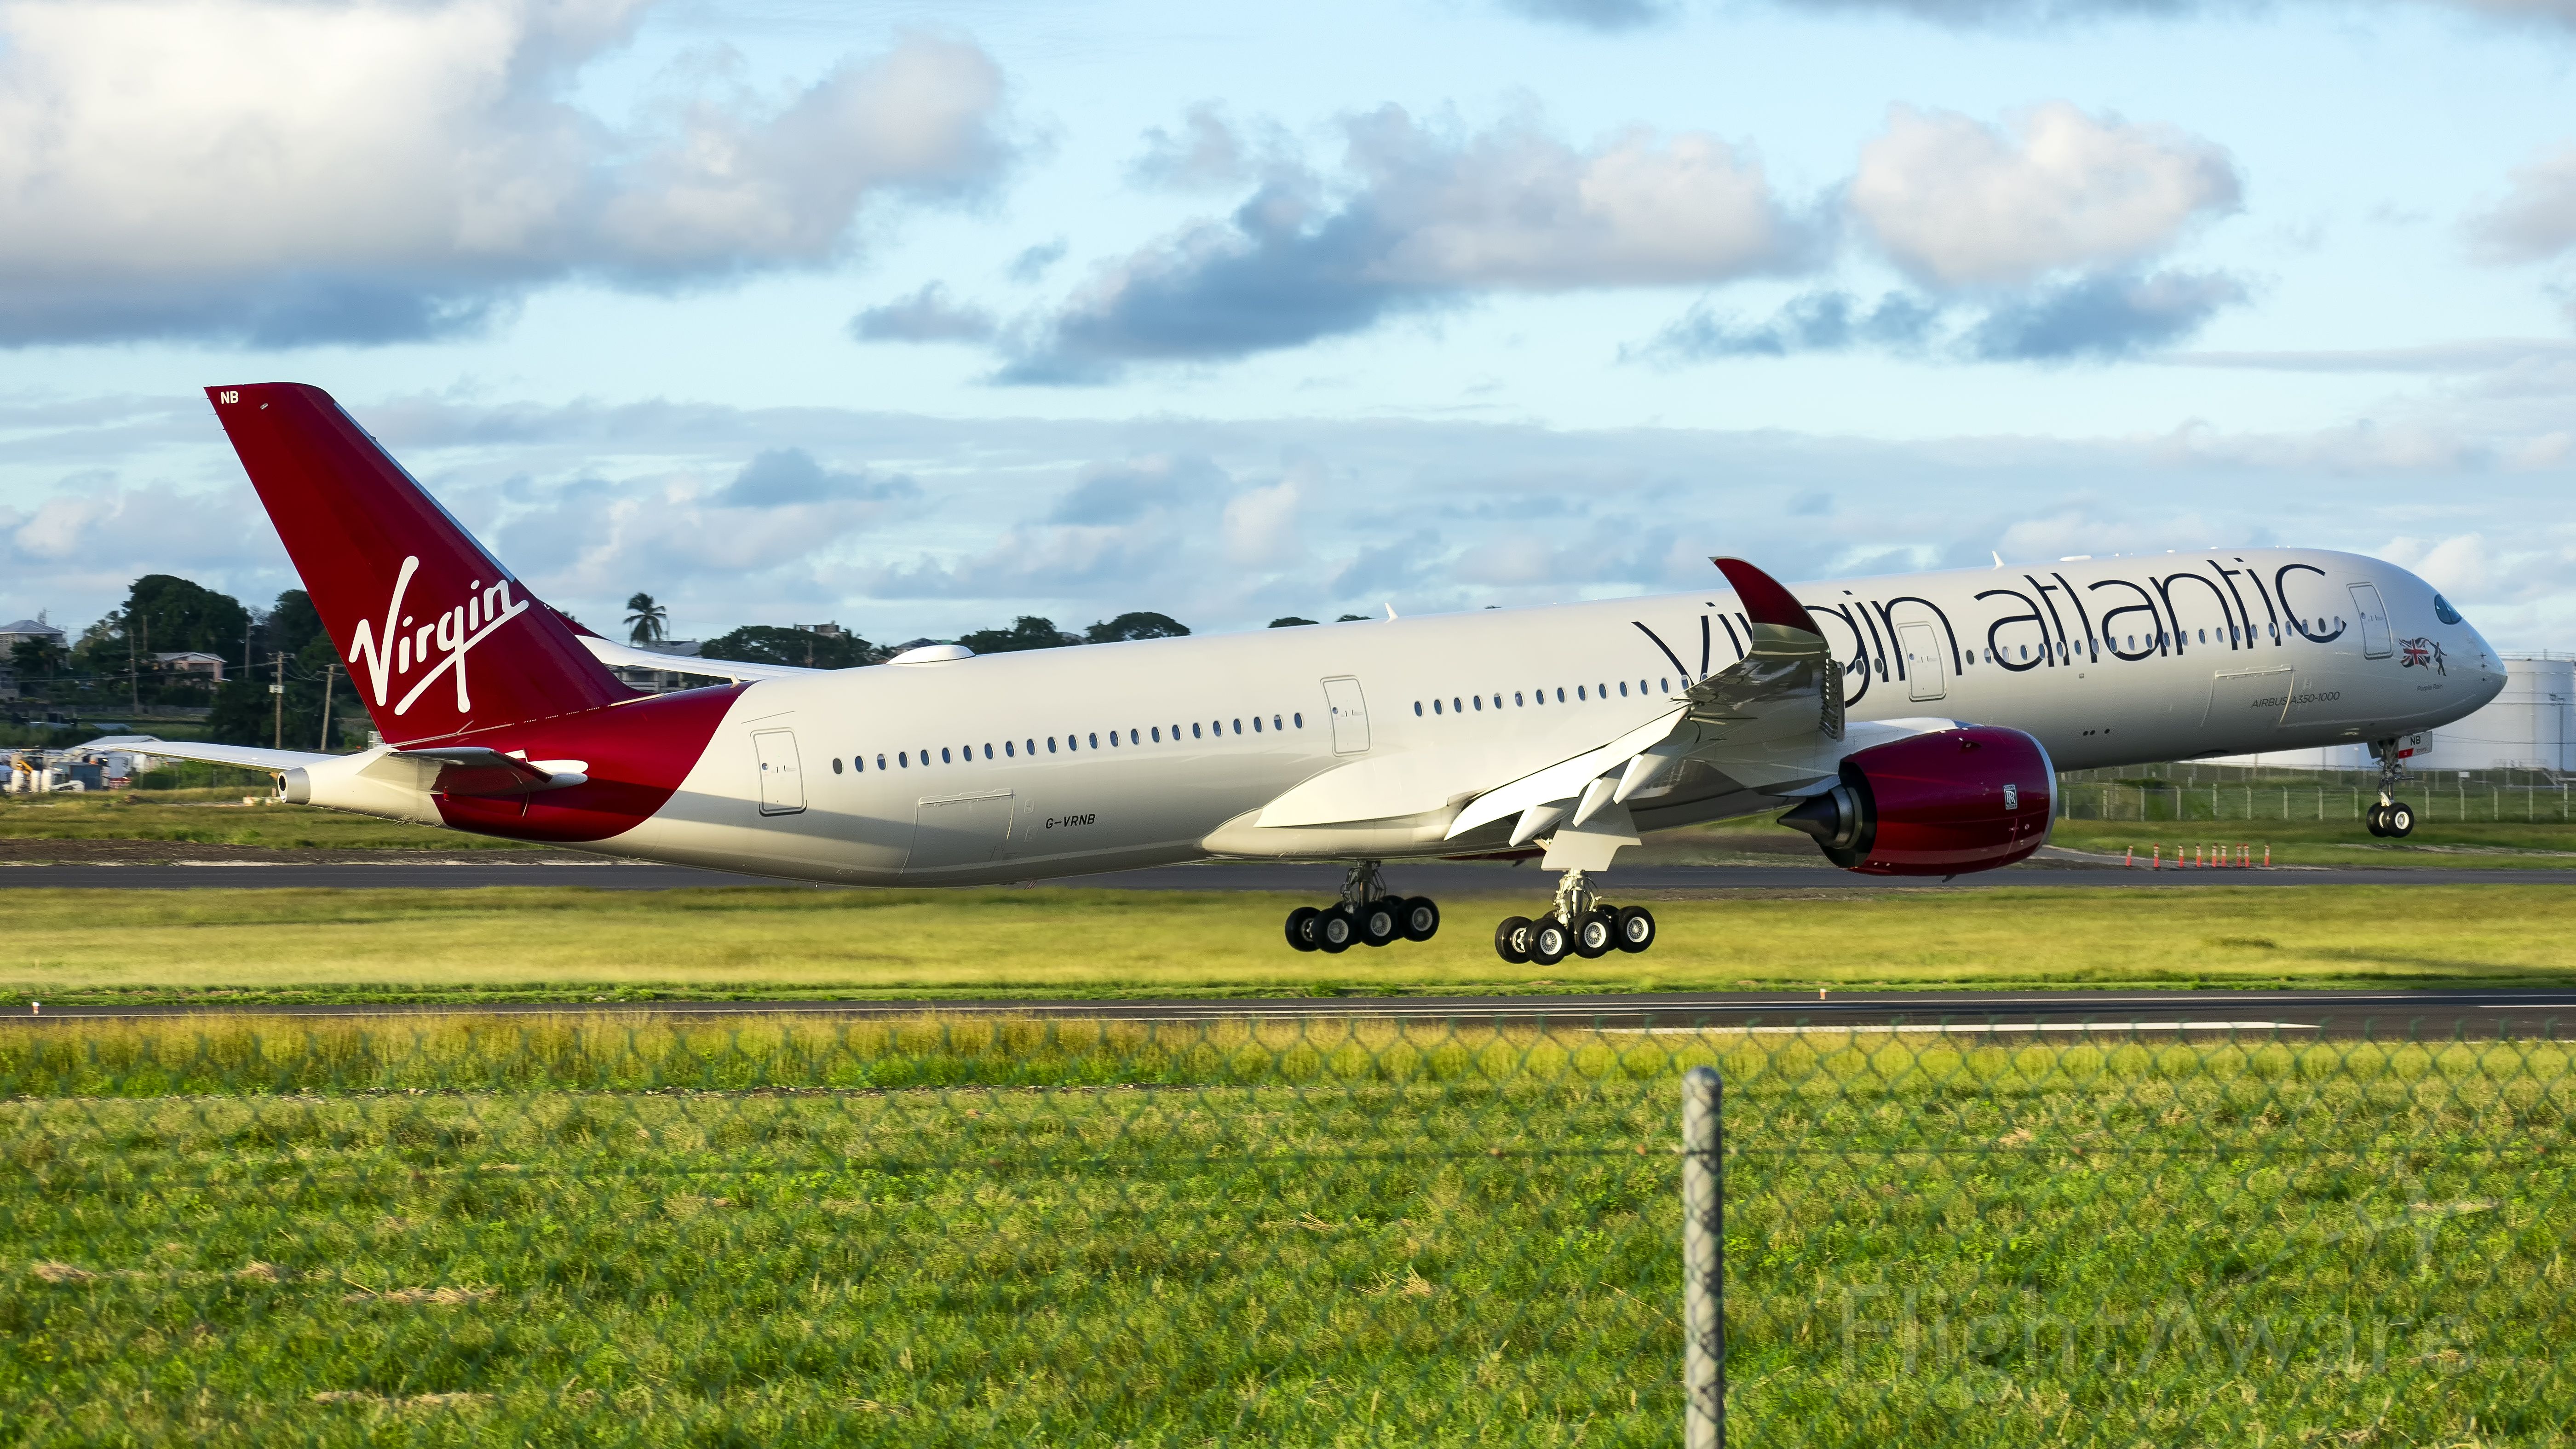 Airbus A350-1000 (G-VRNB) - The first A350-1000 to visit Barbados! br /Also, Virgin's New A35K named "Purple Rain"!